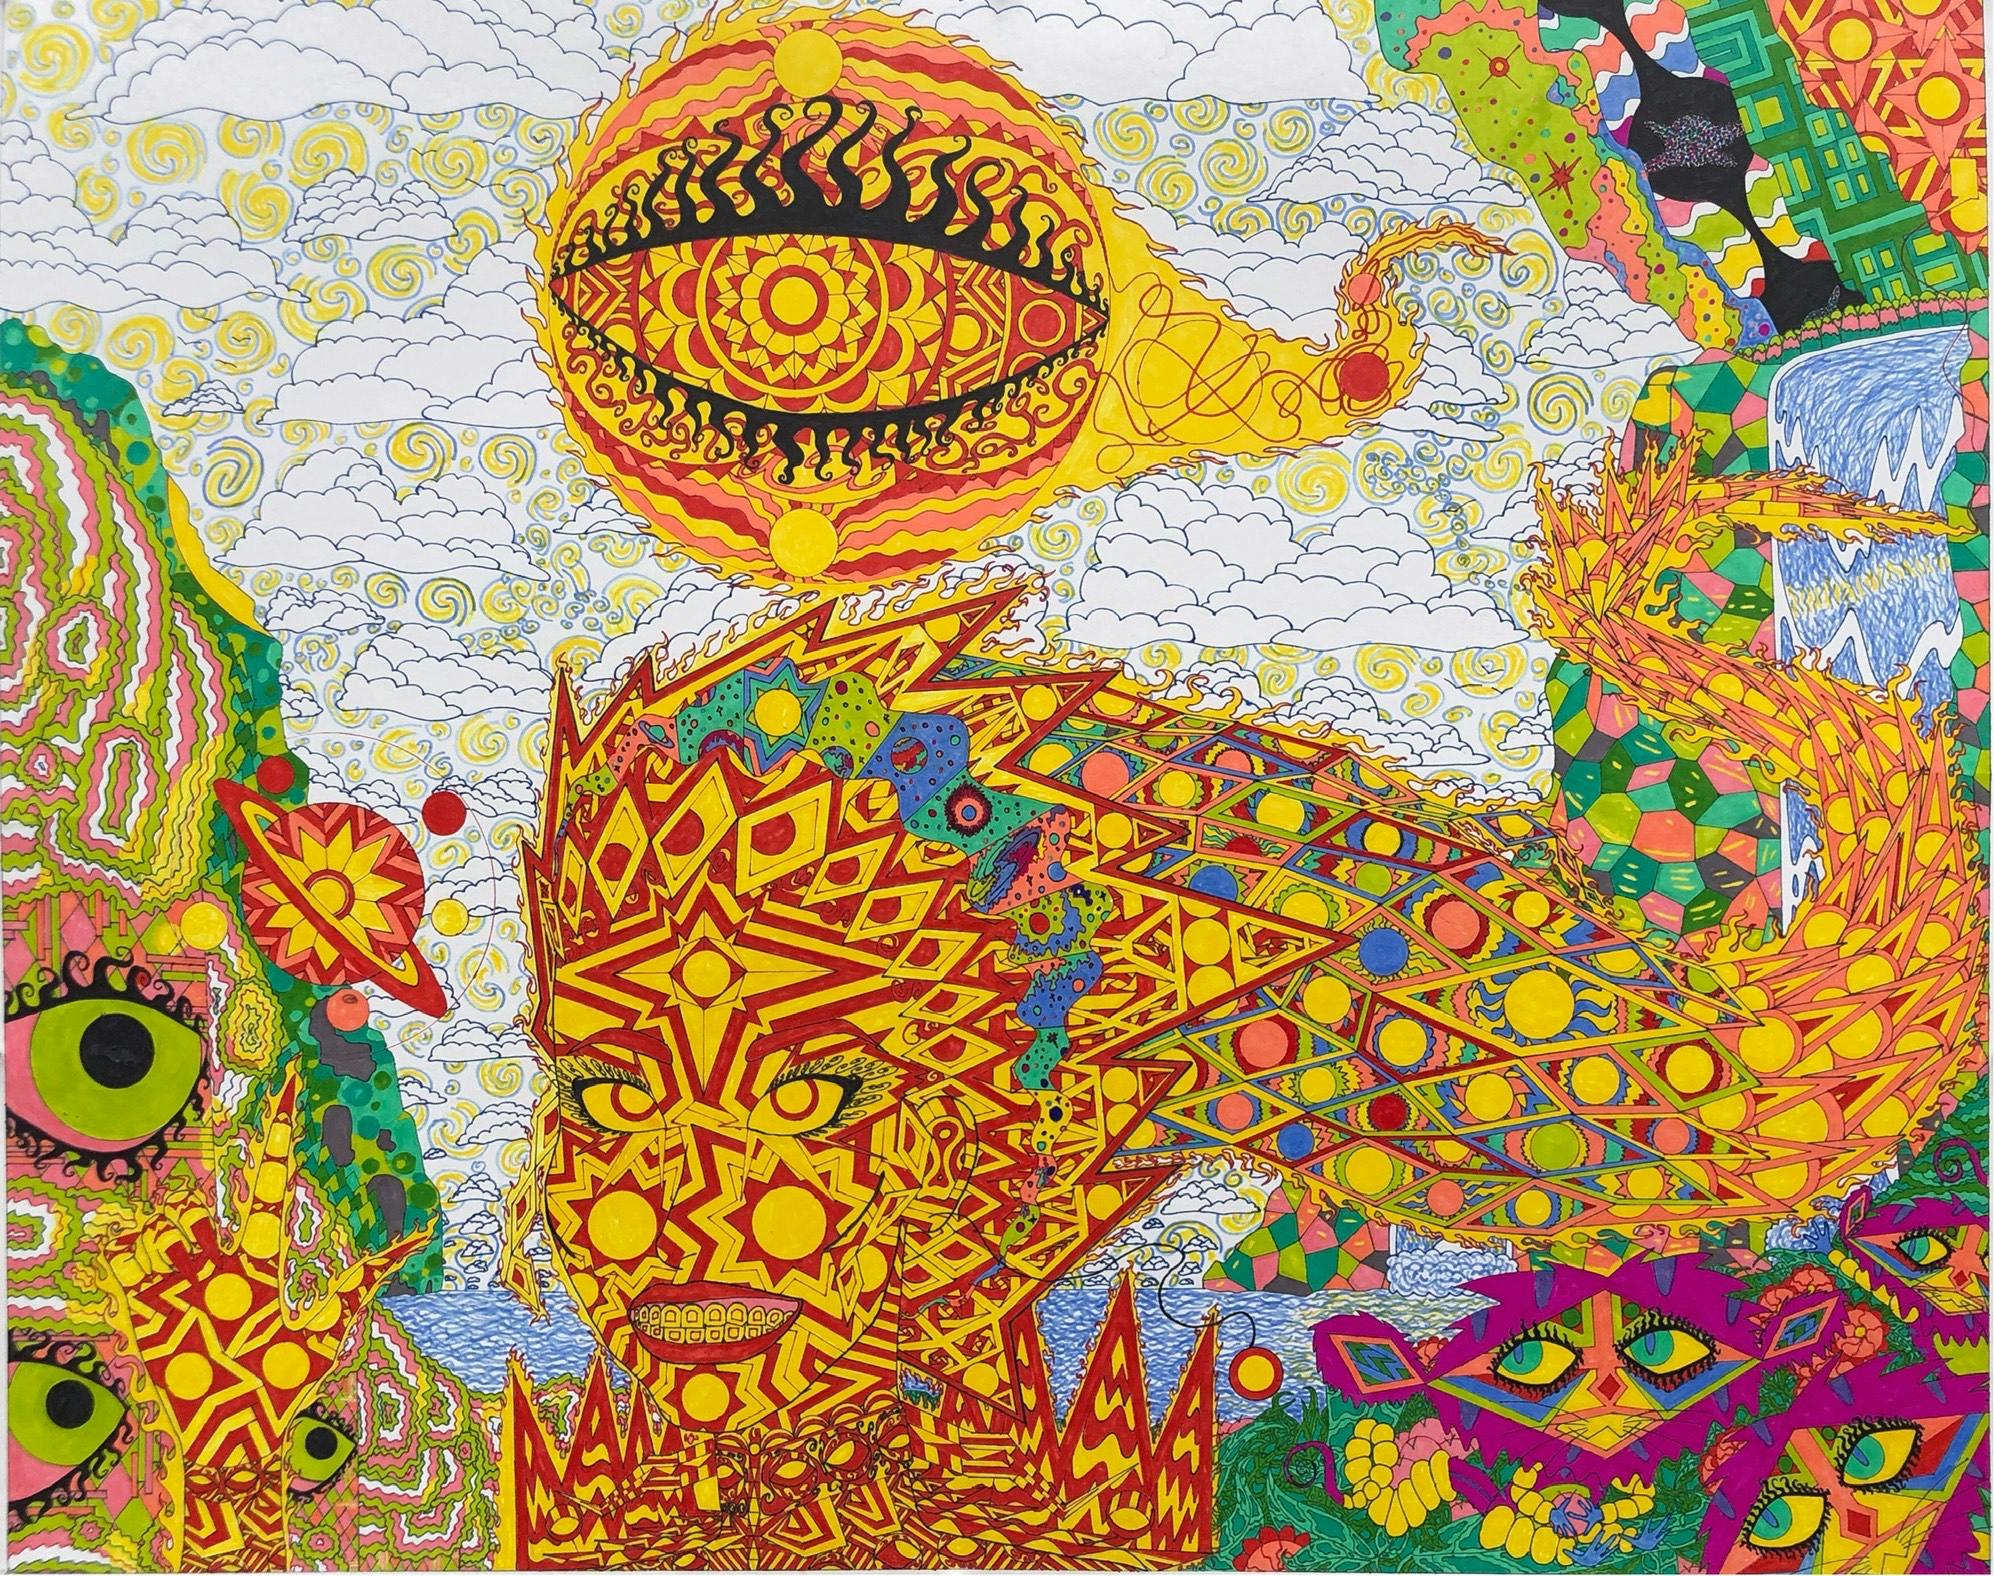 colourful coloured pencil drawing of a geometric landscape. In the middle of the sky there is an eyeball, and below it, a feminine face with long hair. All of the details are intersected with smaller mosaic-style illustrations. The colour scheme is vibrant, with yellow and red the most obvious tones